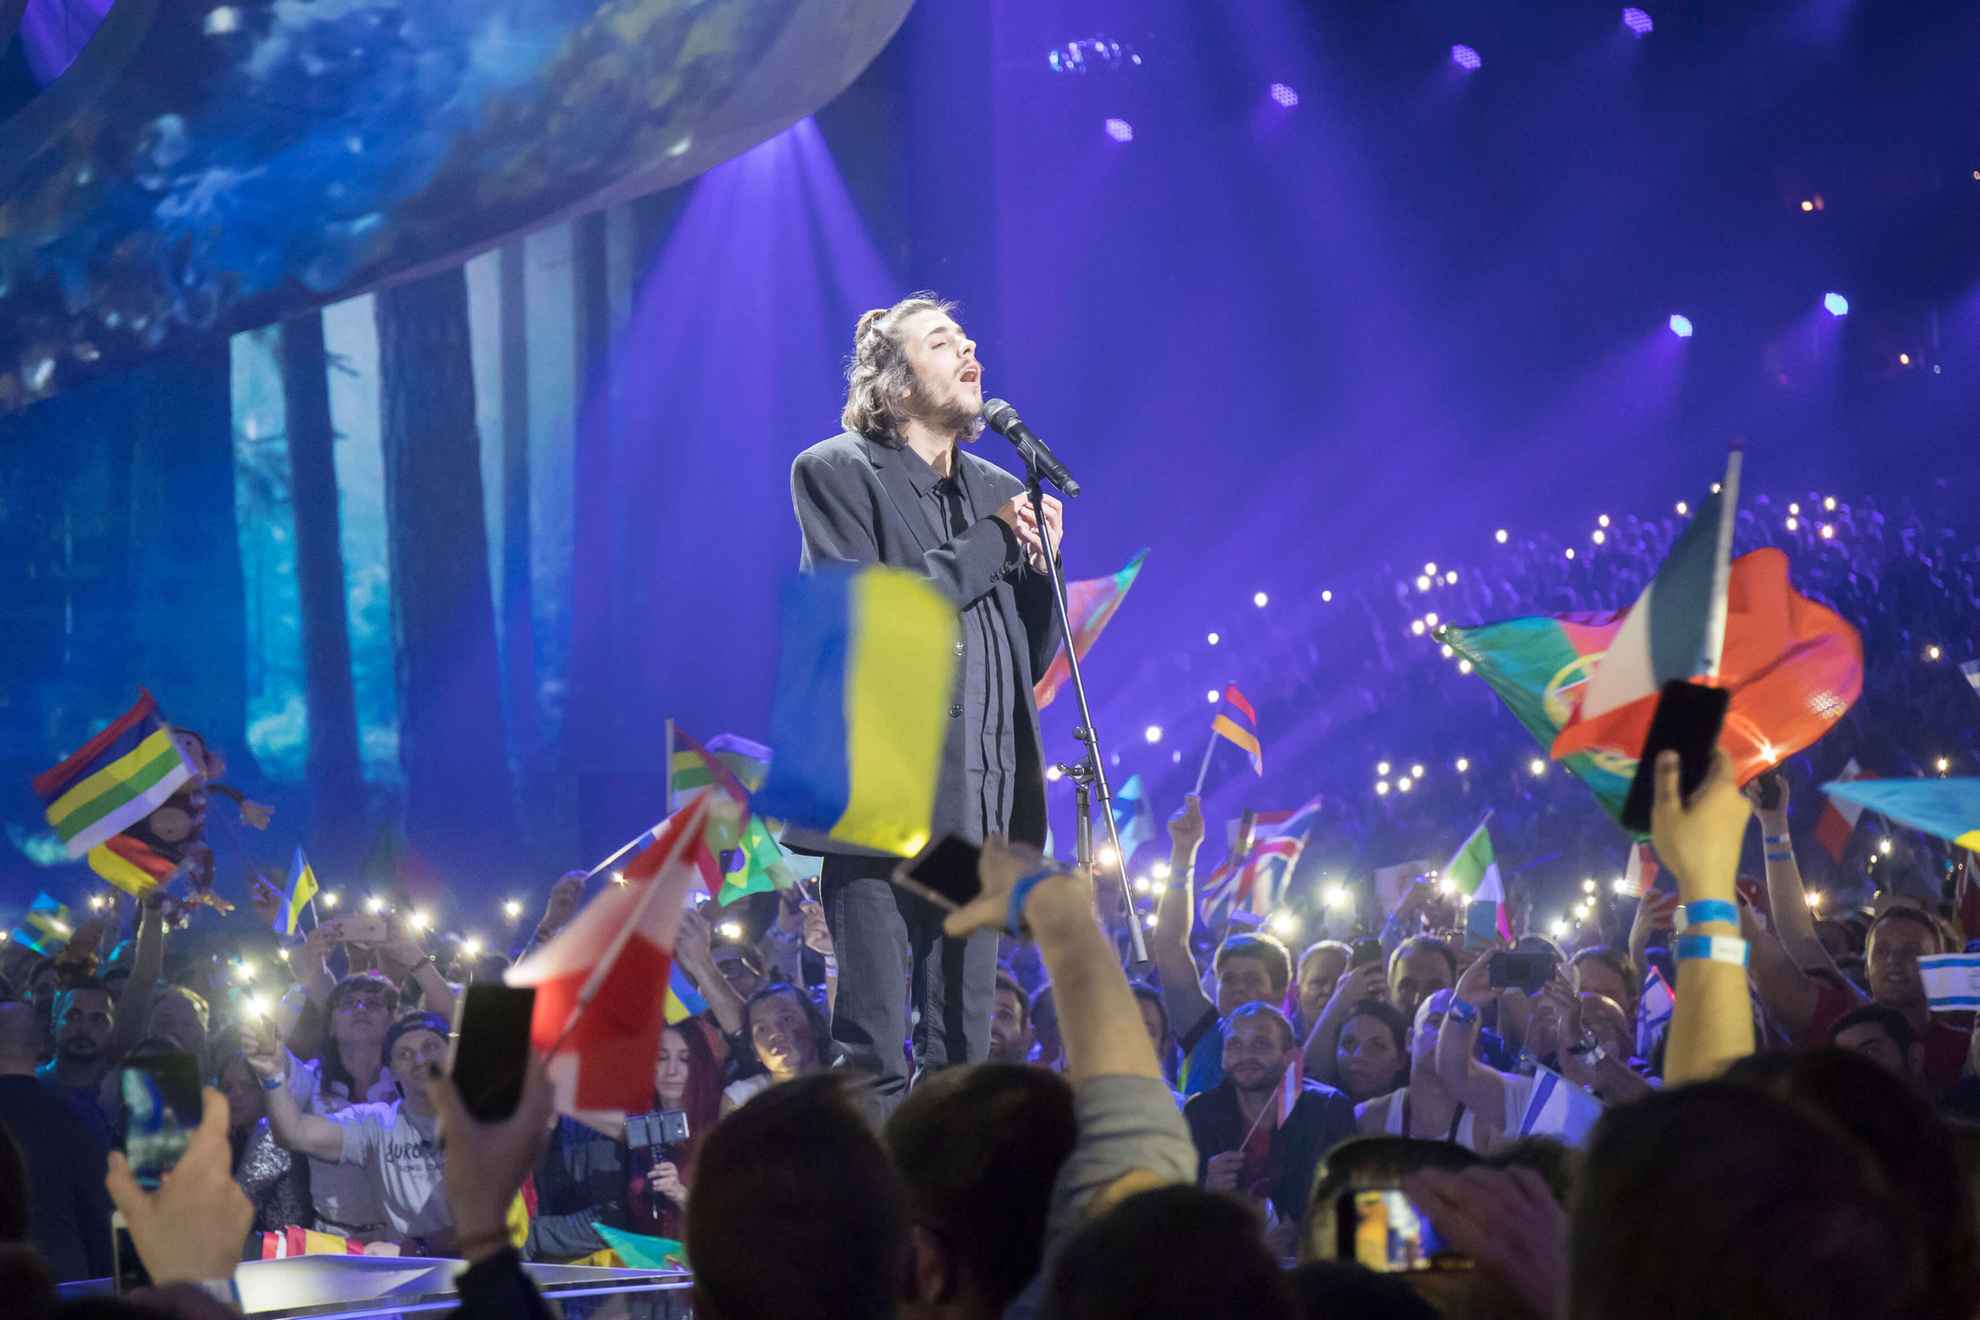 Salvador Sobral, winner of the Eurovision Song Contest 2017, performing on stage